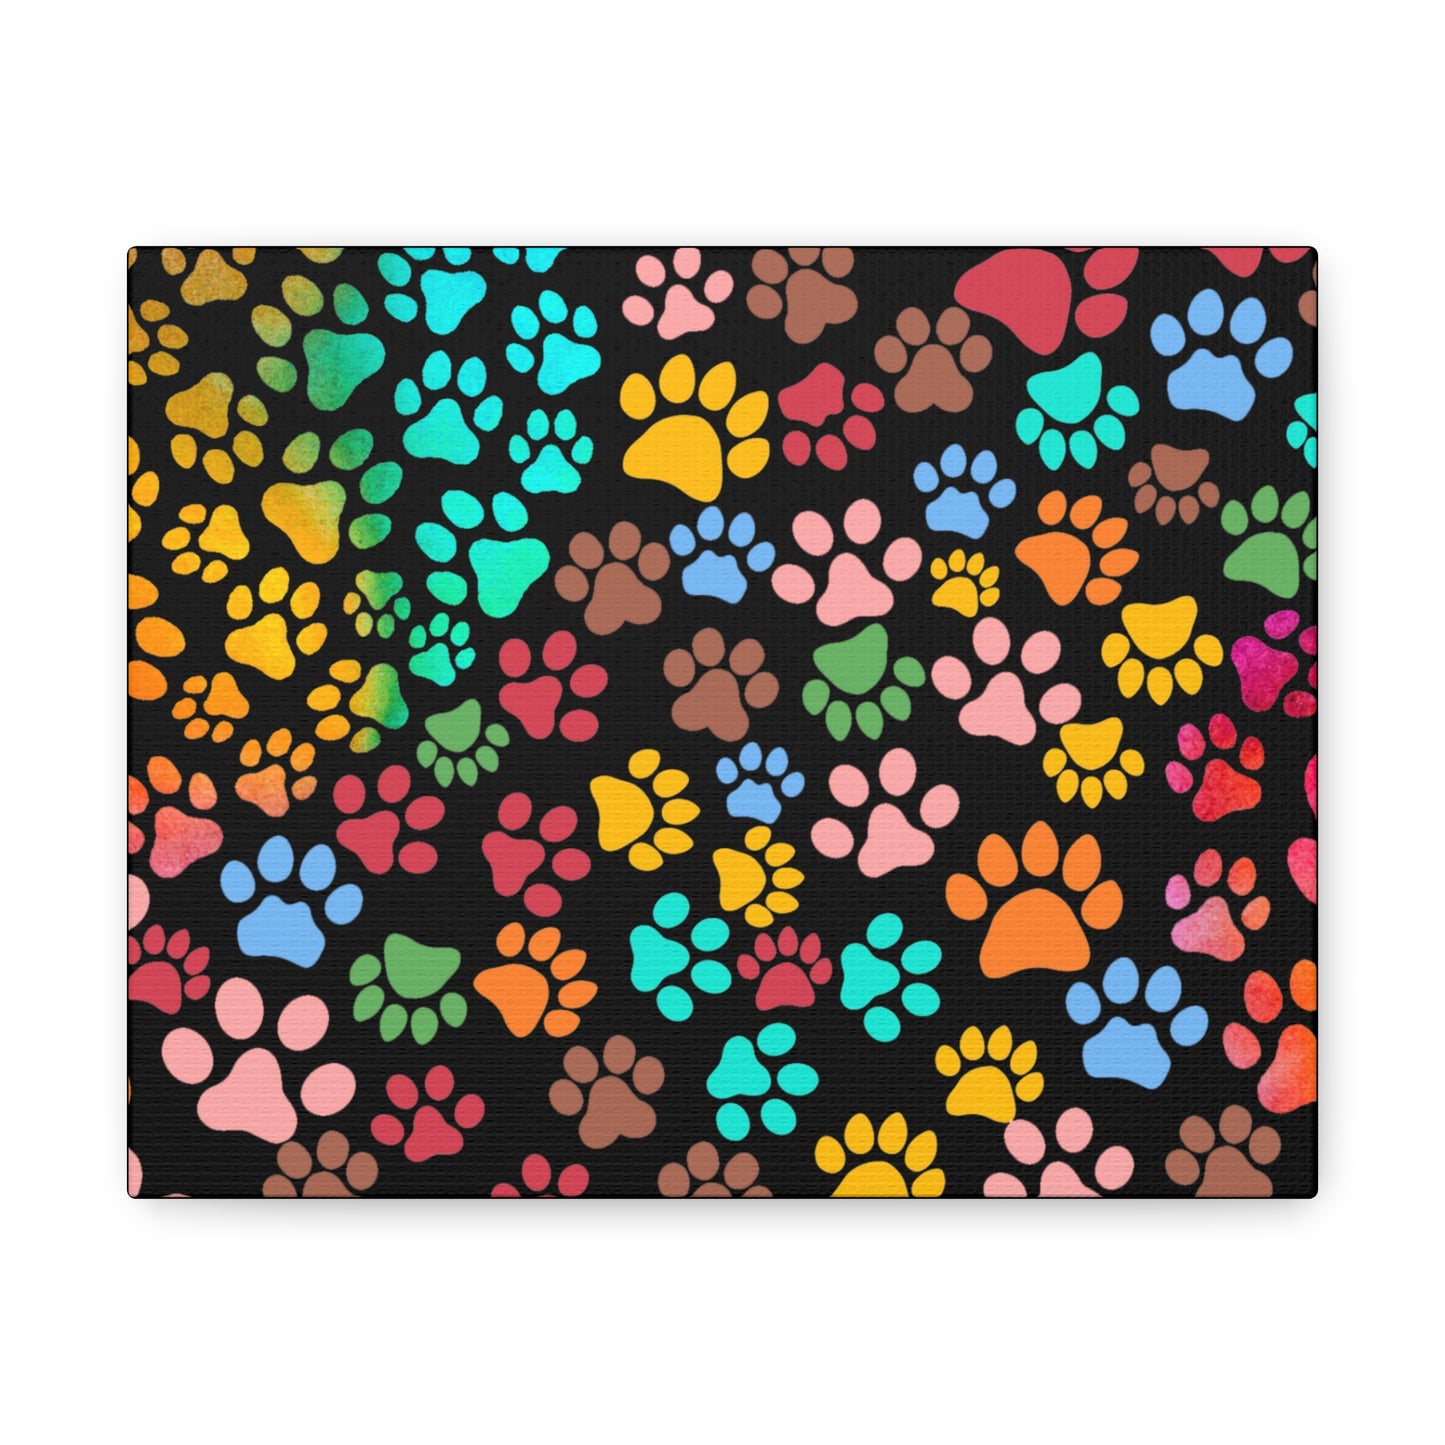 Paws Pattern Canvas Gallery Wraps